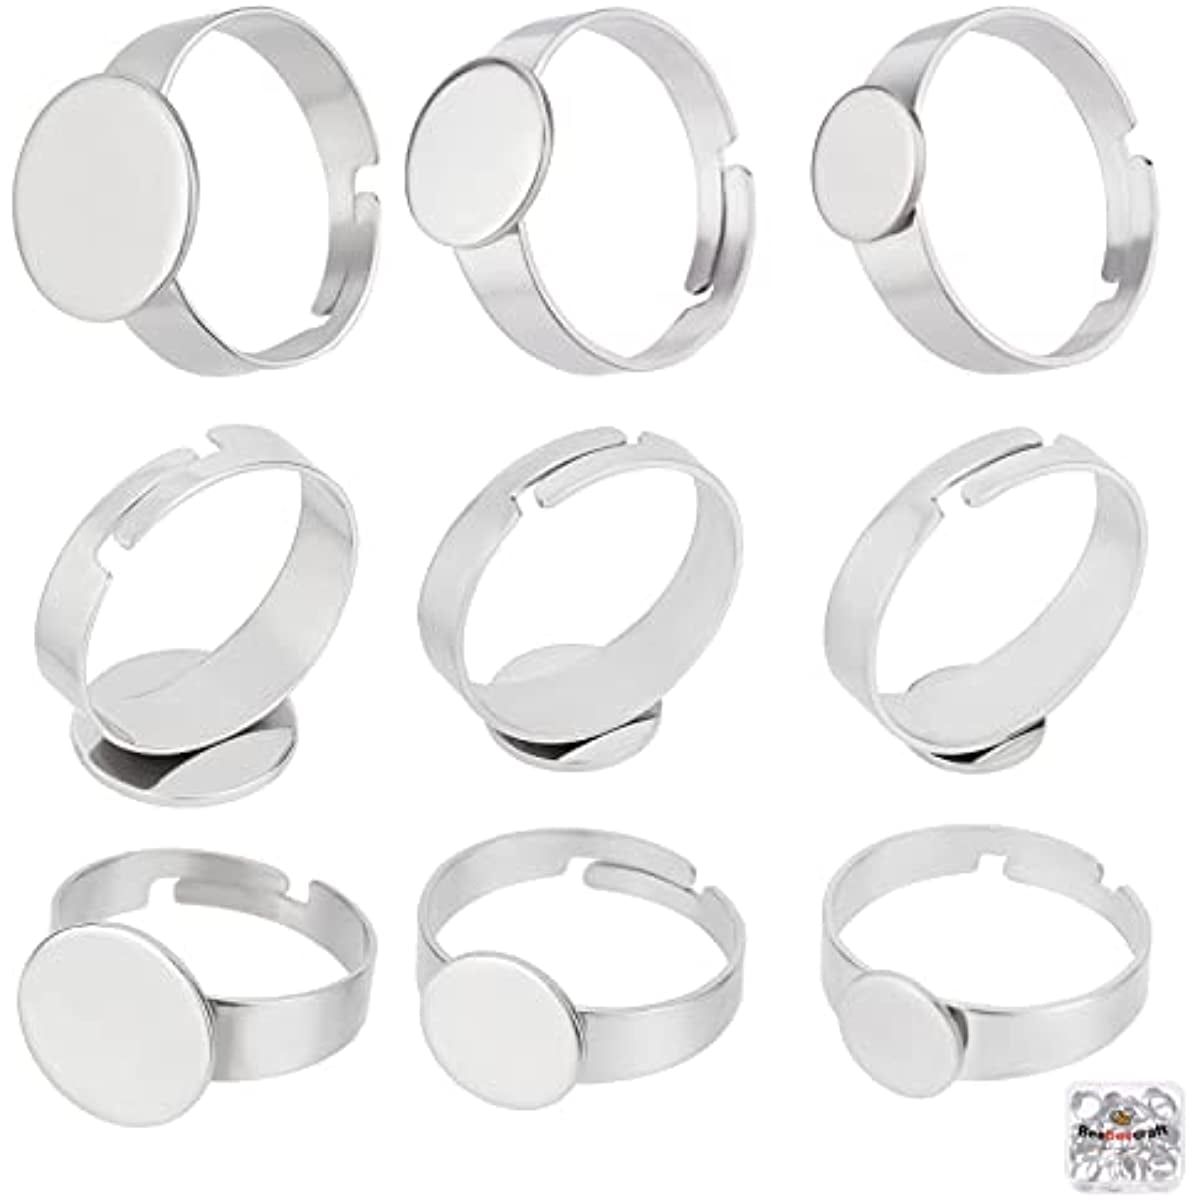 200 Best Ring Size Adjuster ideas  ring size adjuster, ring size, rings